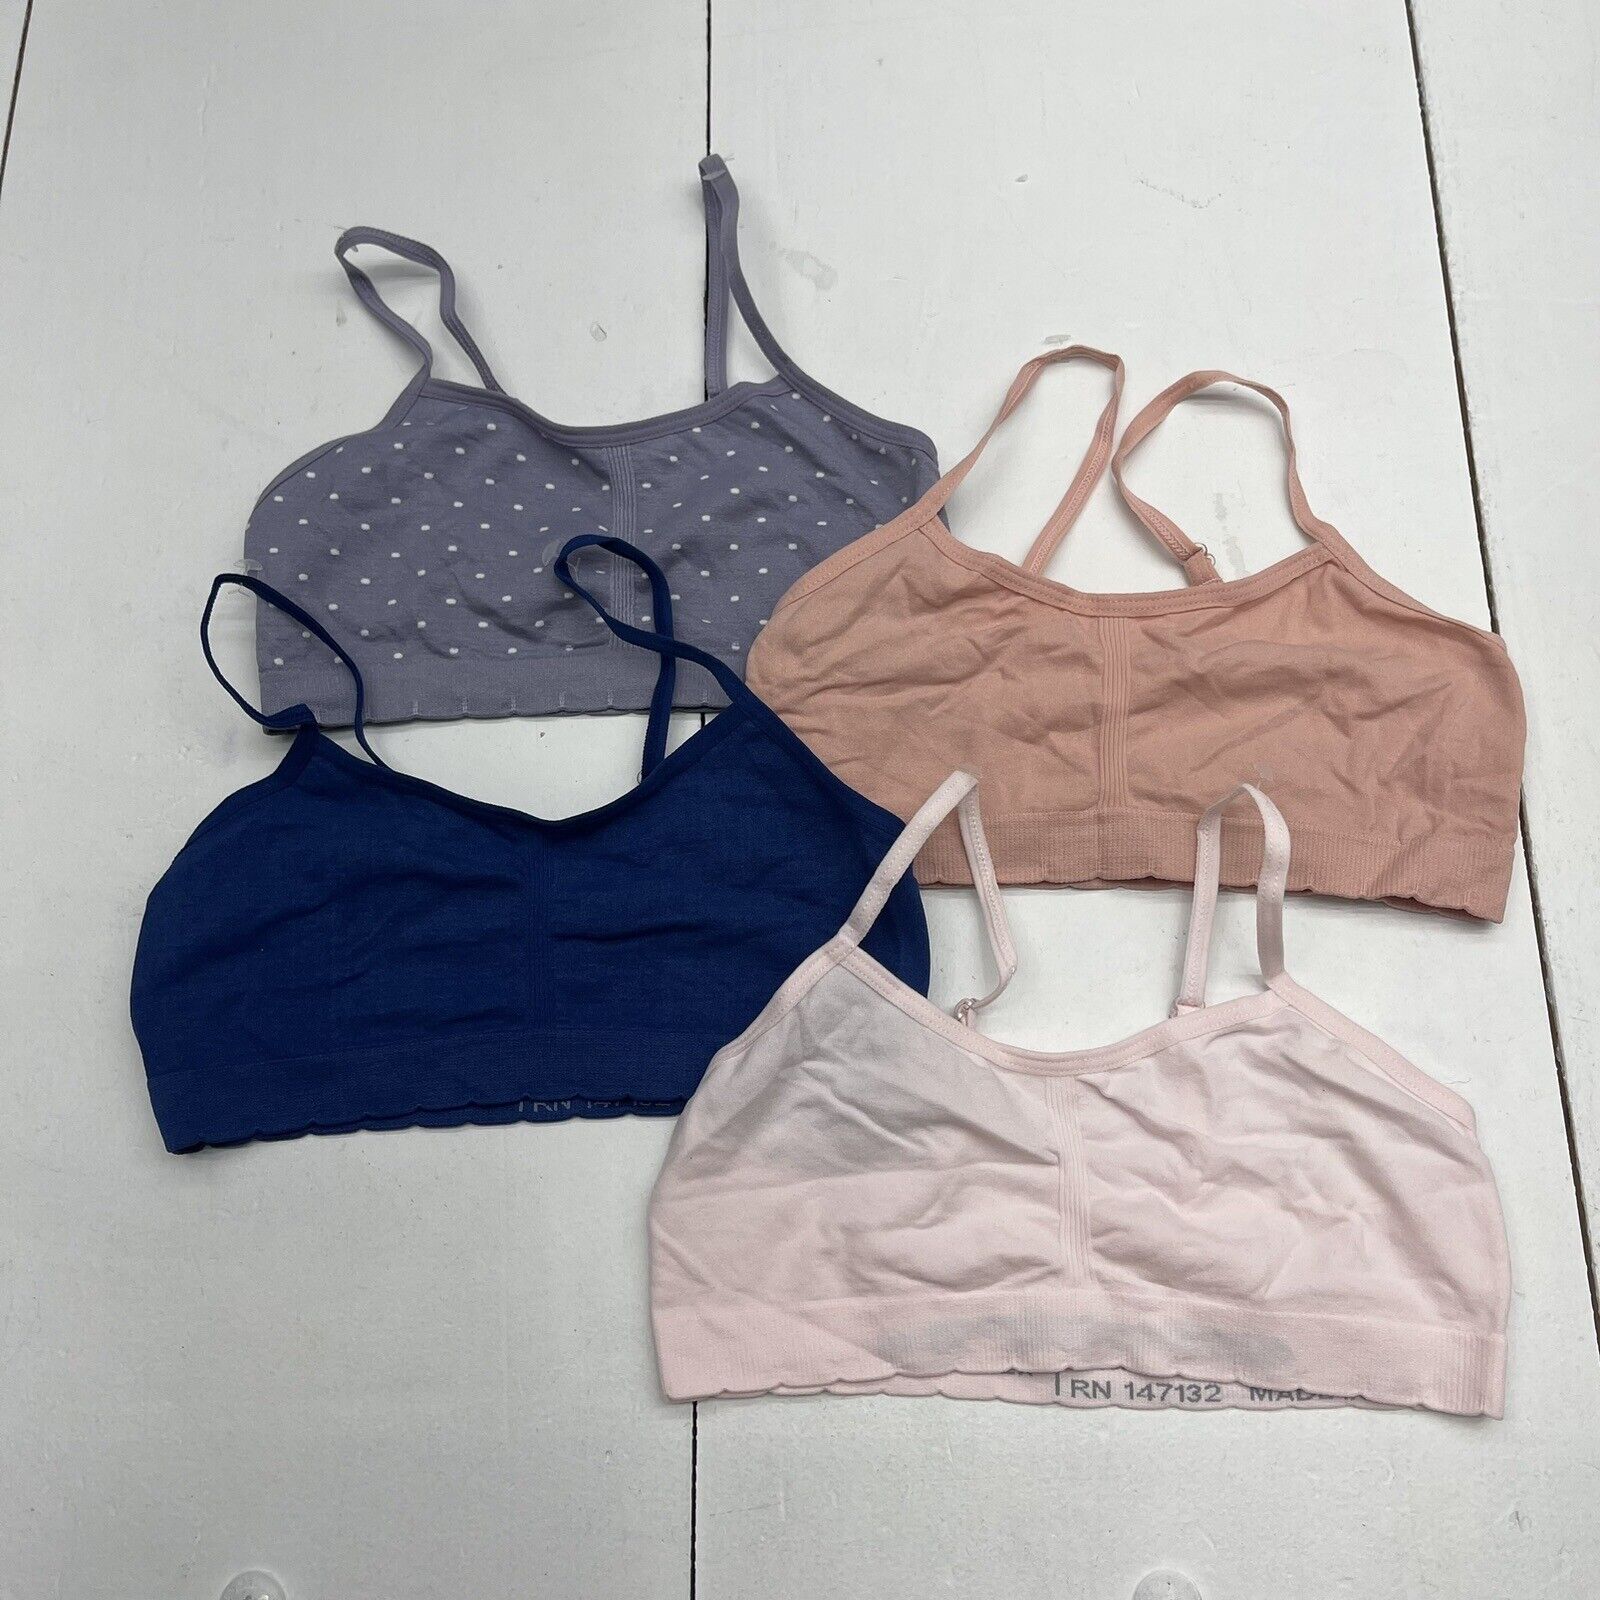 Chic La Vie 4 Pack Multicolored Sports Bras Youth Girls Size Small NWO -  beyond exchange